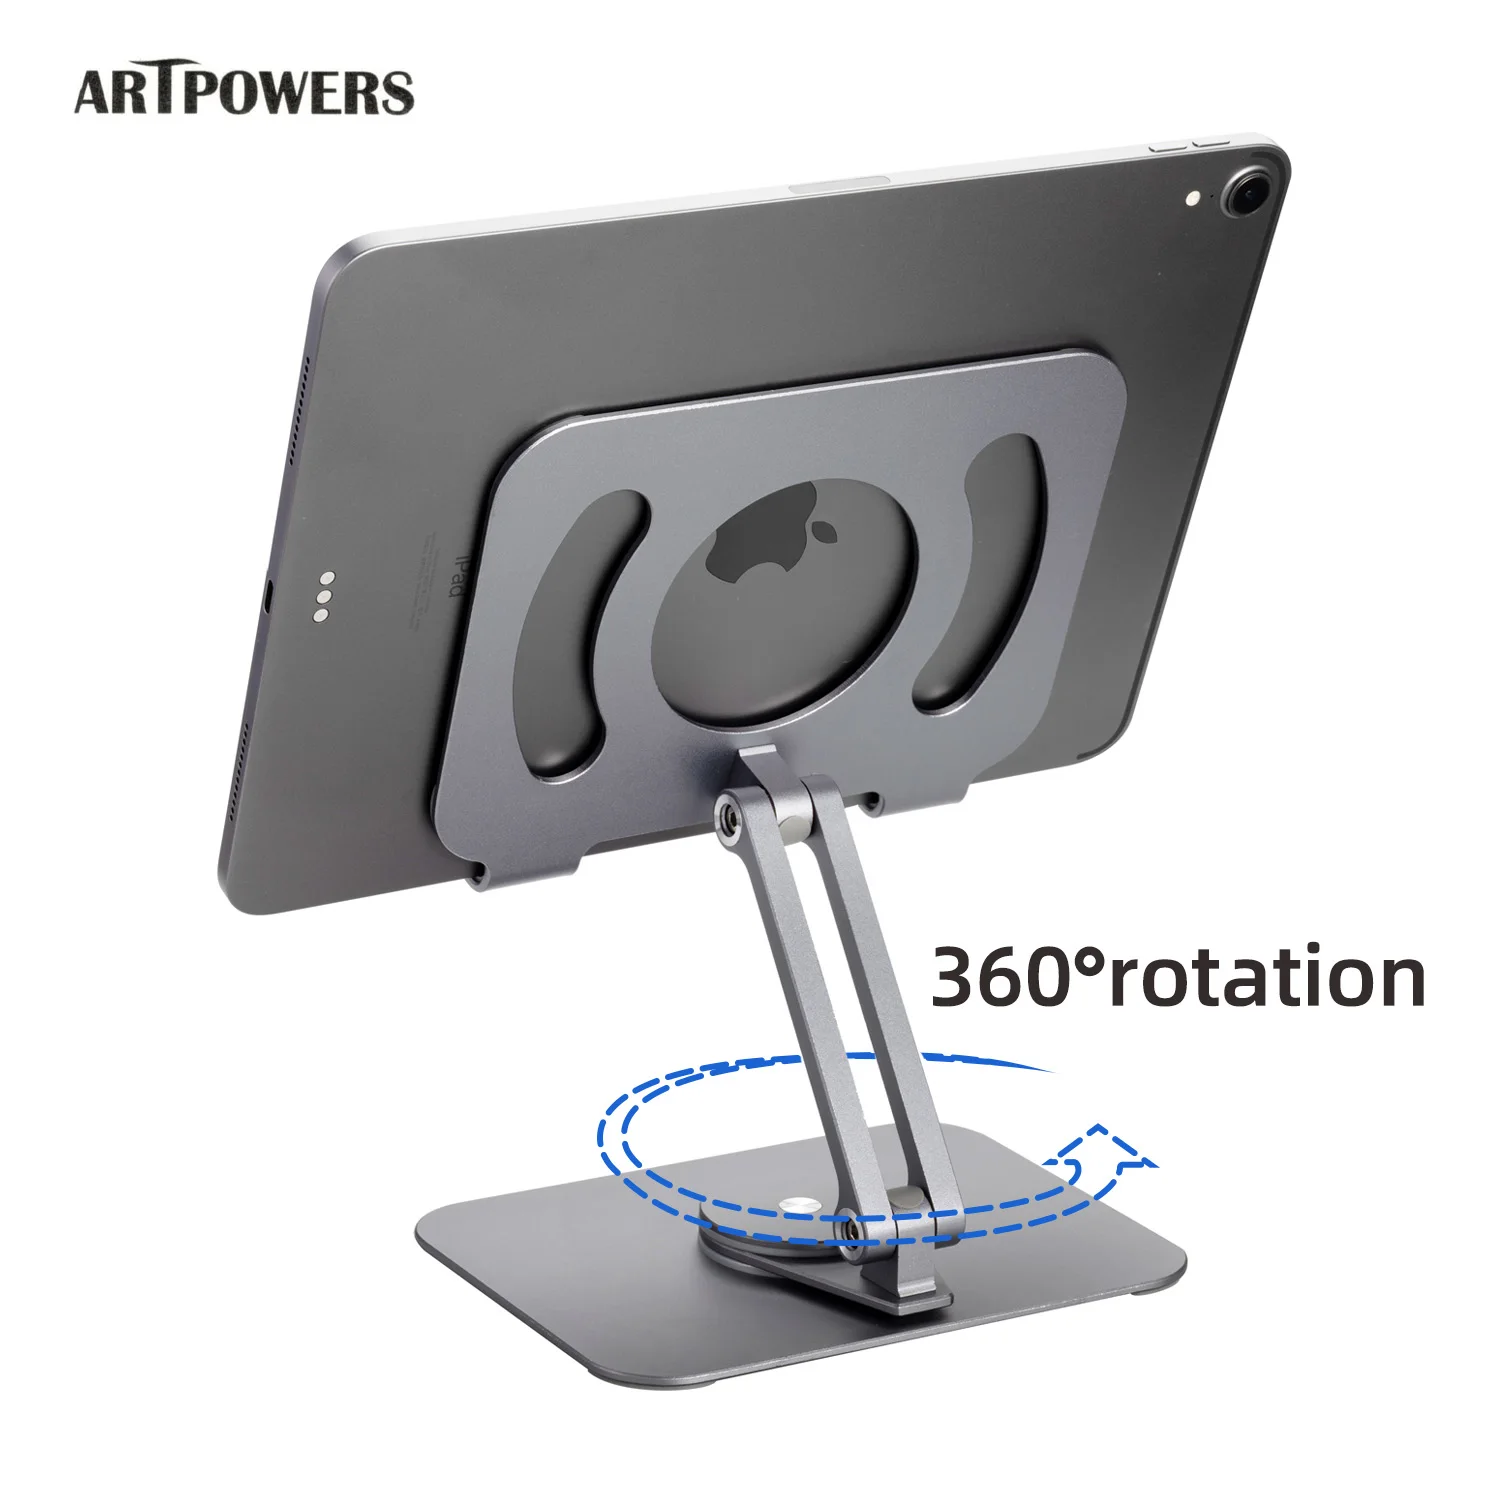 Artpowers 360° Rotation Metal Desk Tablet Pad Stand Holder Support for iPad Apple Huawei Kinder Laptop Notebook Accessories